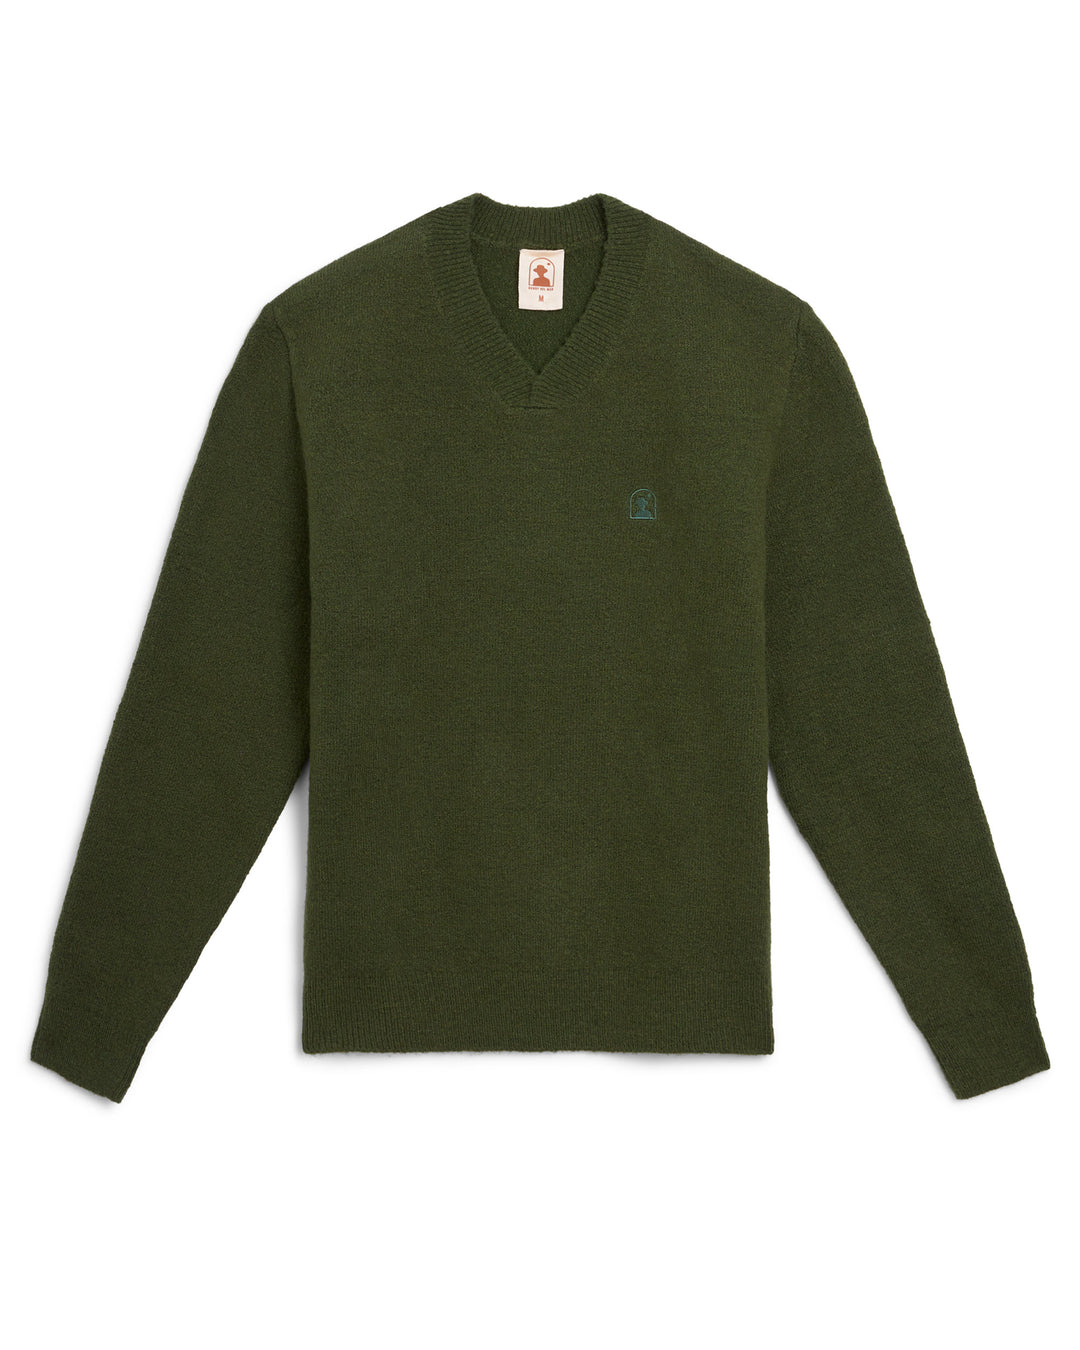 A Dandy Del Mar Lima Sweater with a v-neck and an embroidered logo.